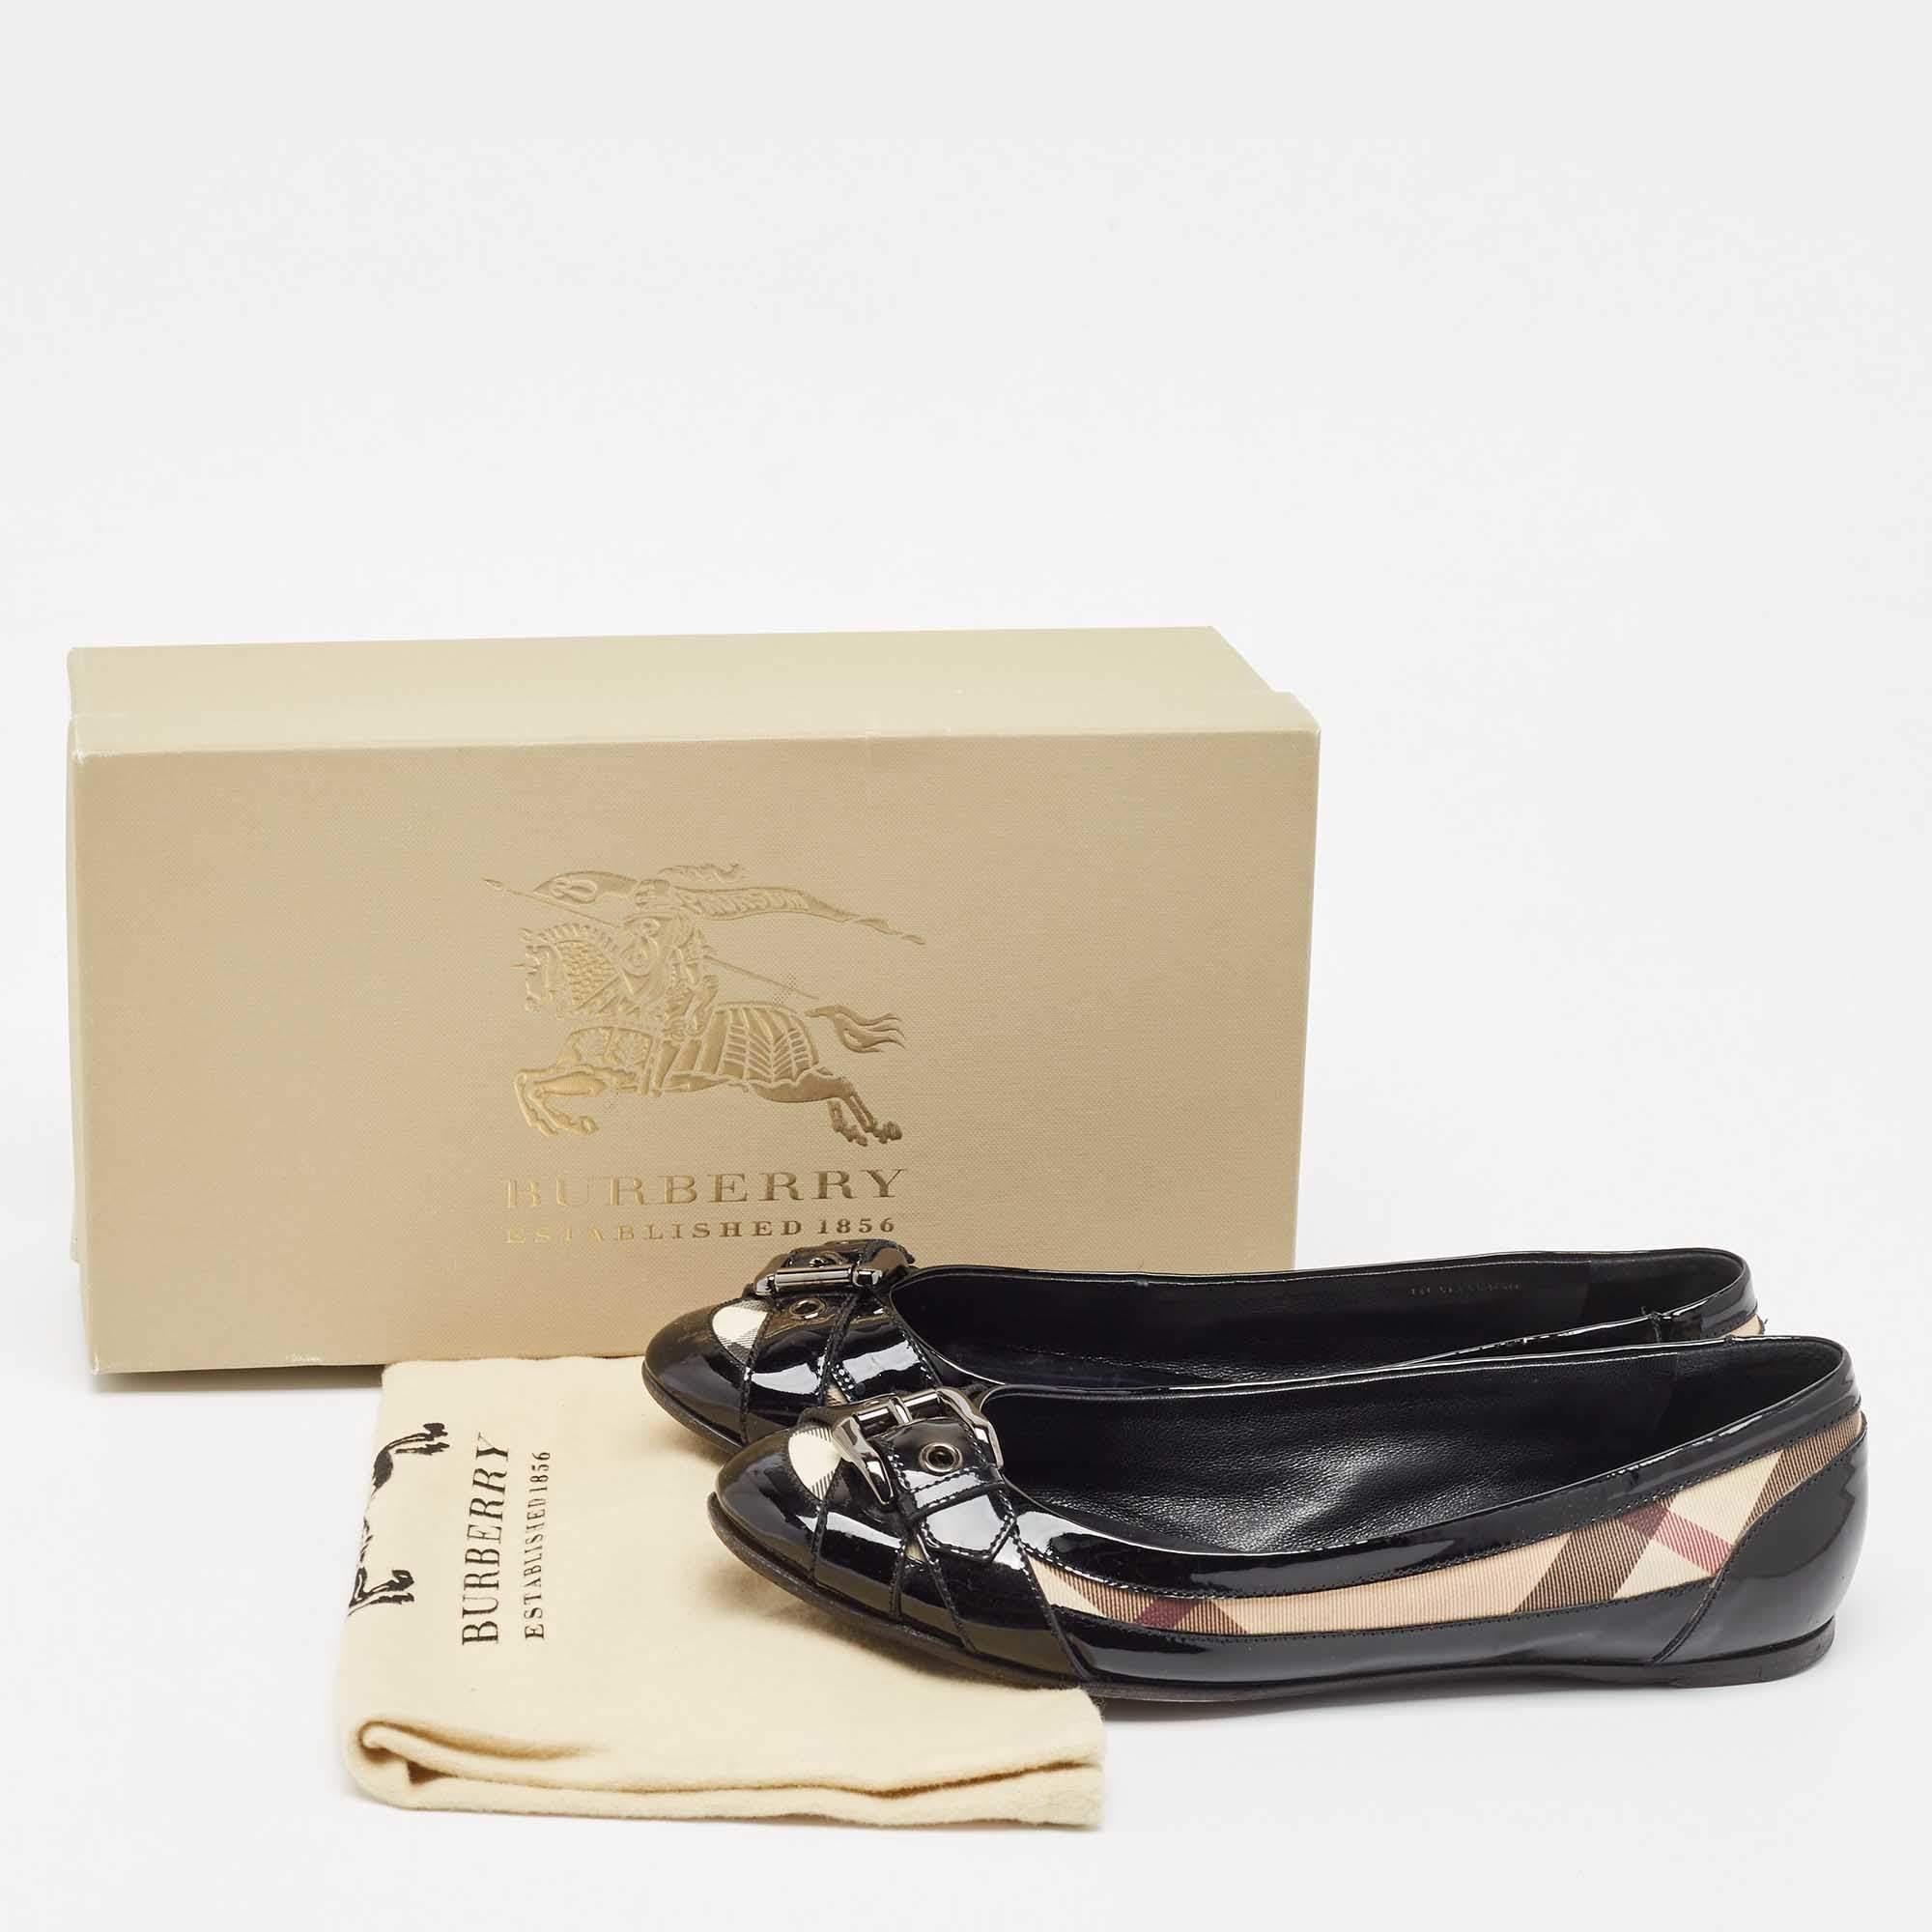 Burberry Nova Check PVC and Patent Leather Buckle Ballet Flats Size 38 For Sale 5